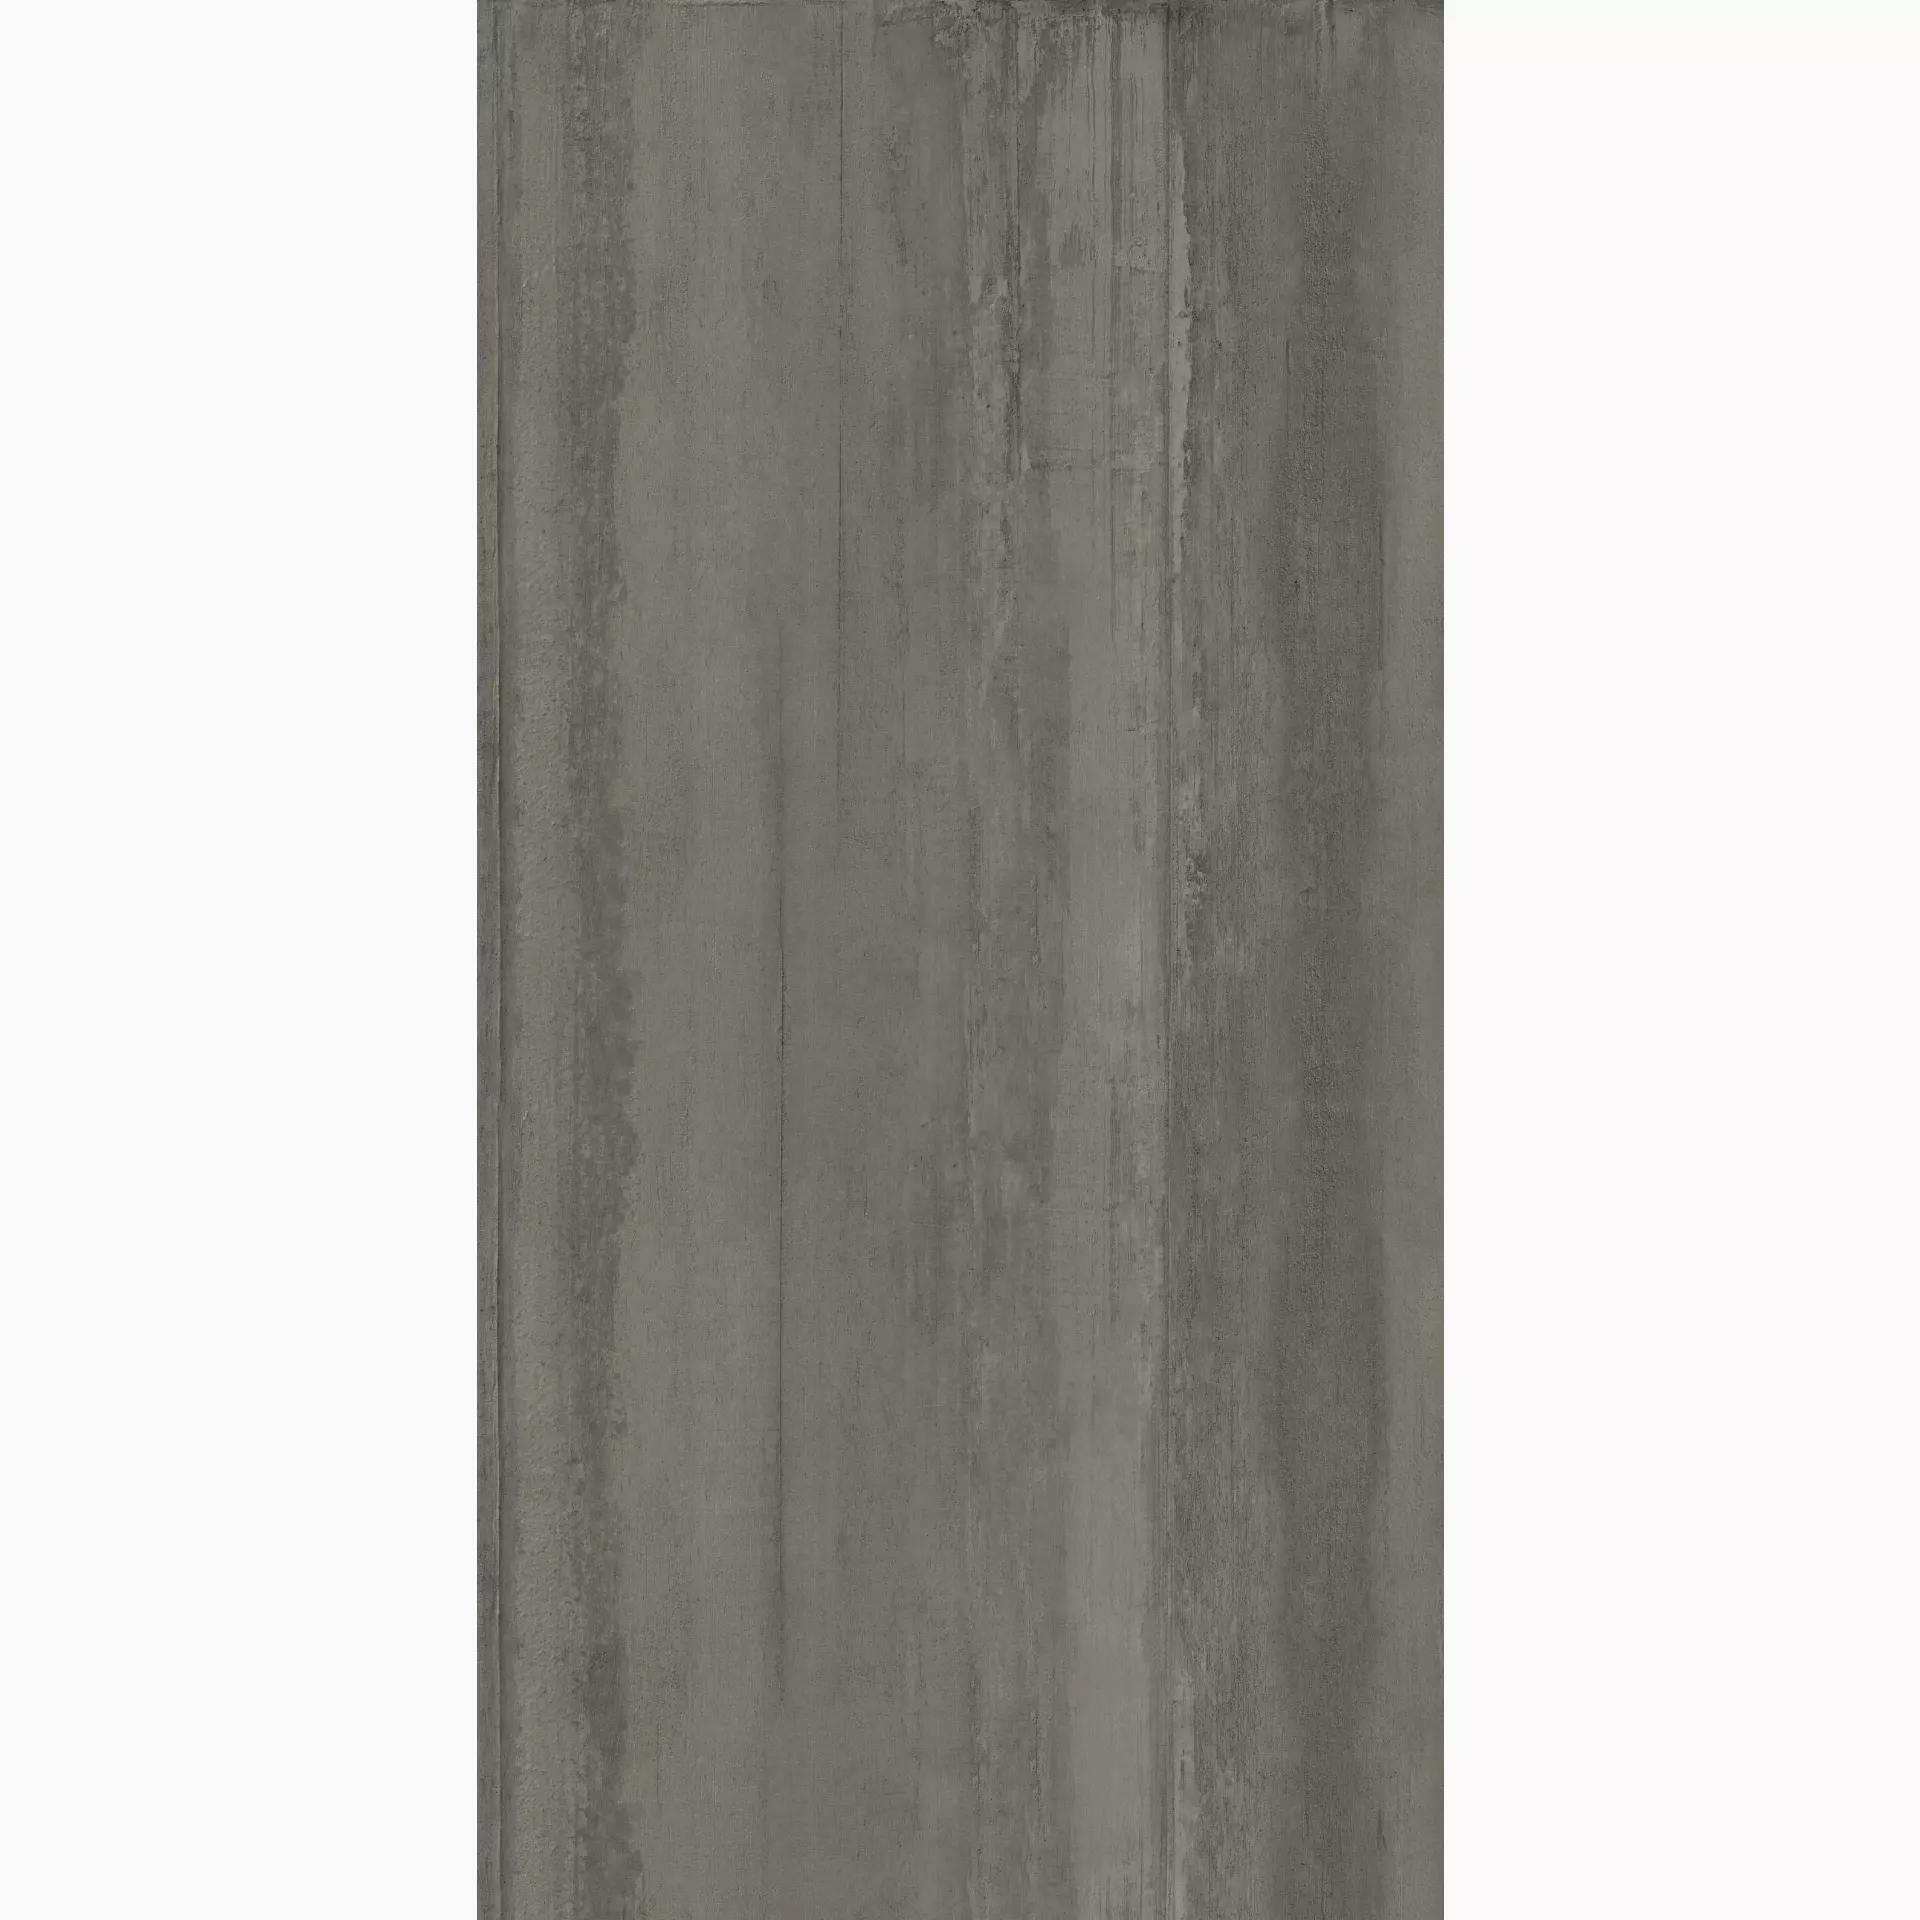 ABK Out.20 Lab325 Taupe Outdoor Form PF60002704 60x120cm rektifiziert 20mm